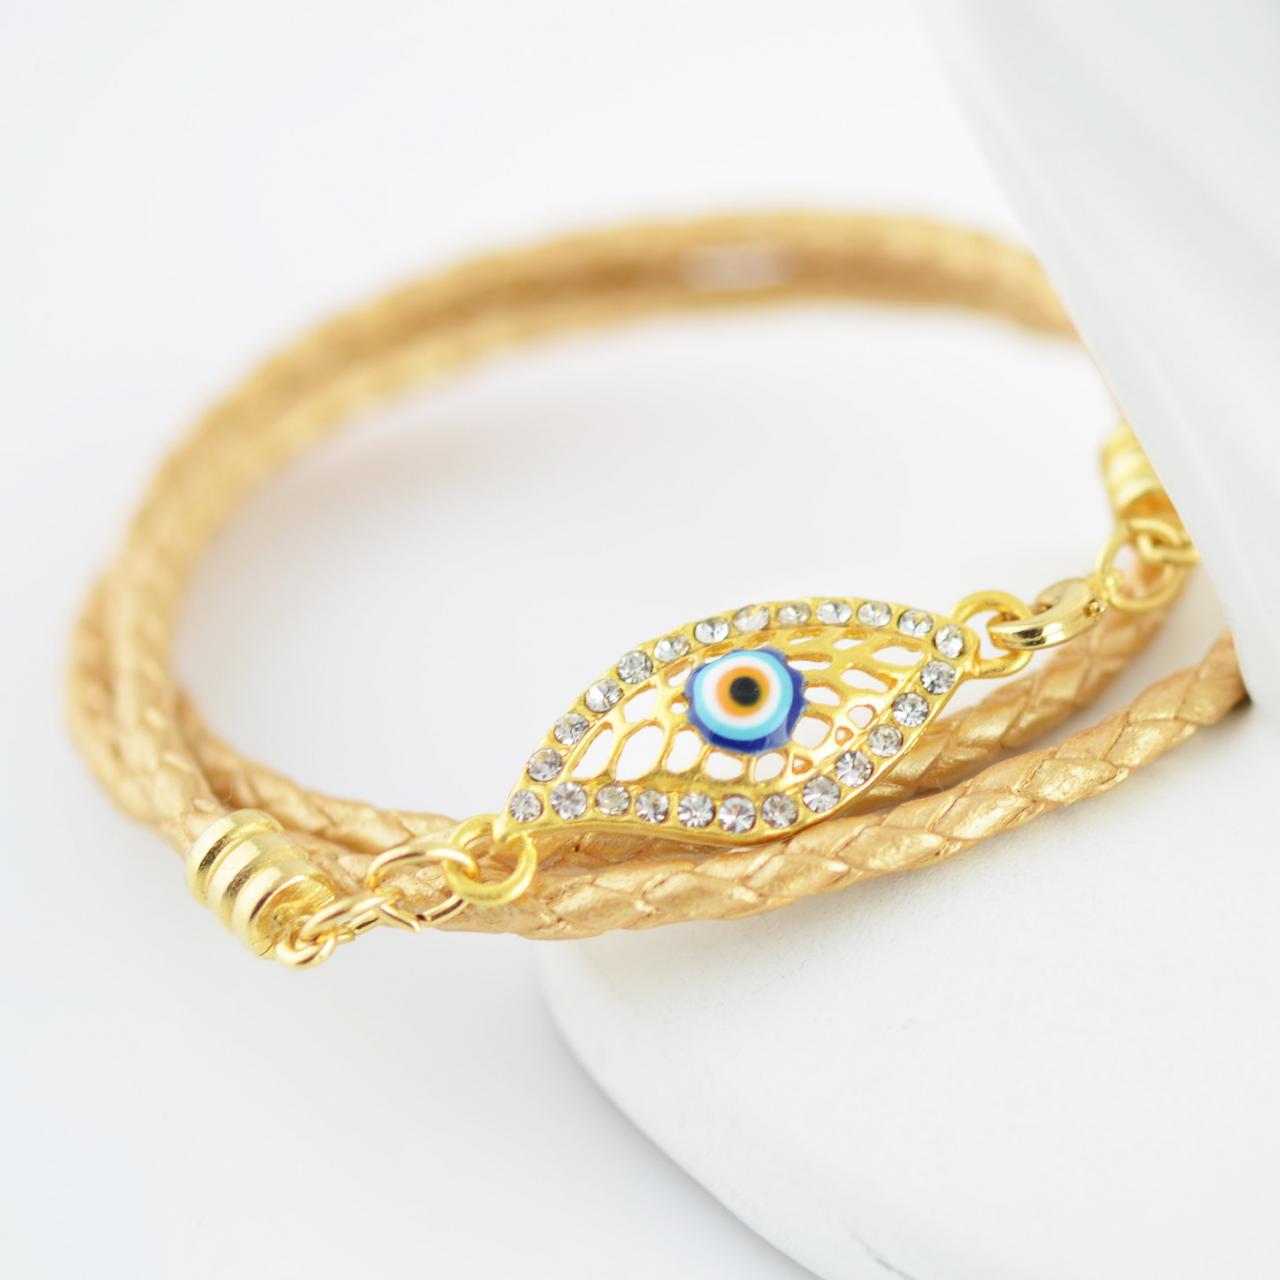 triple wrap bracelet with evil eye charm, gold leather, gold evil eye charm, gift for her, womens jewelry